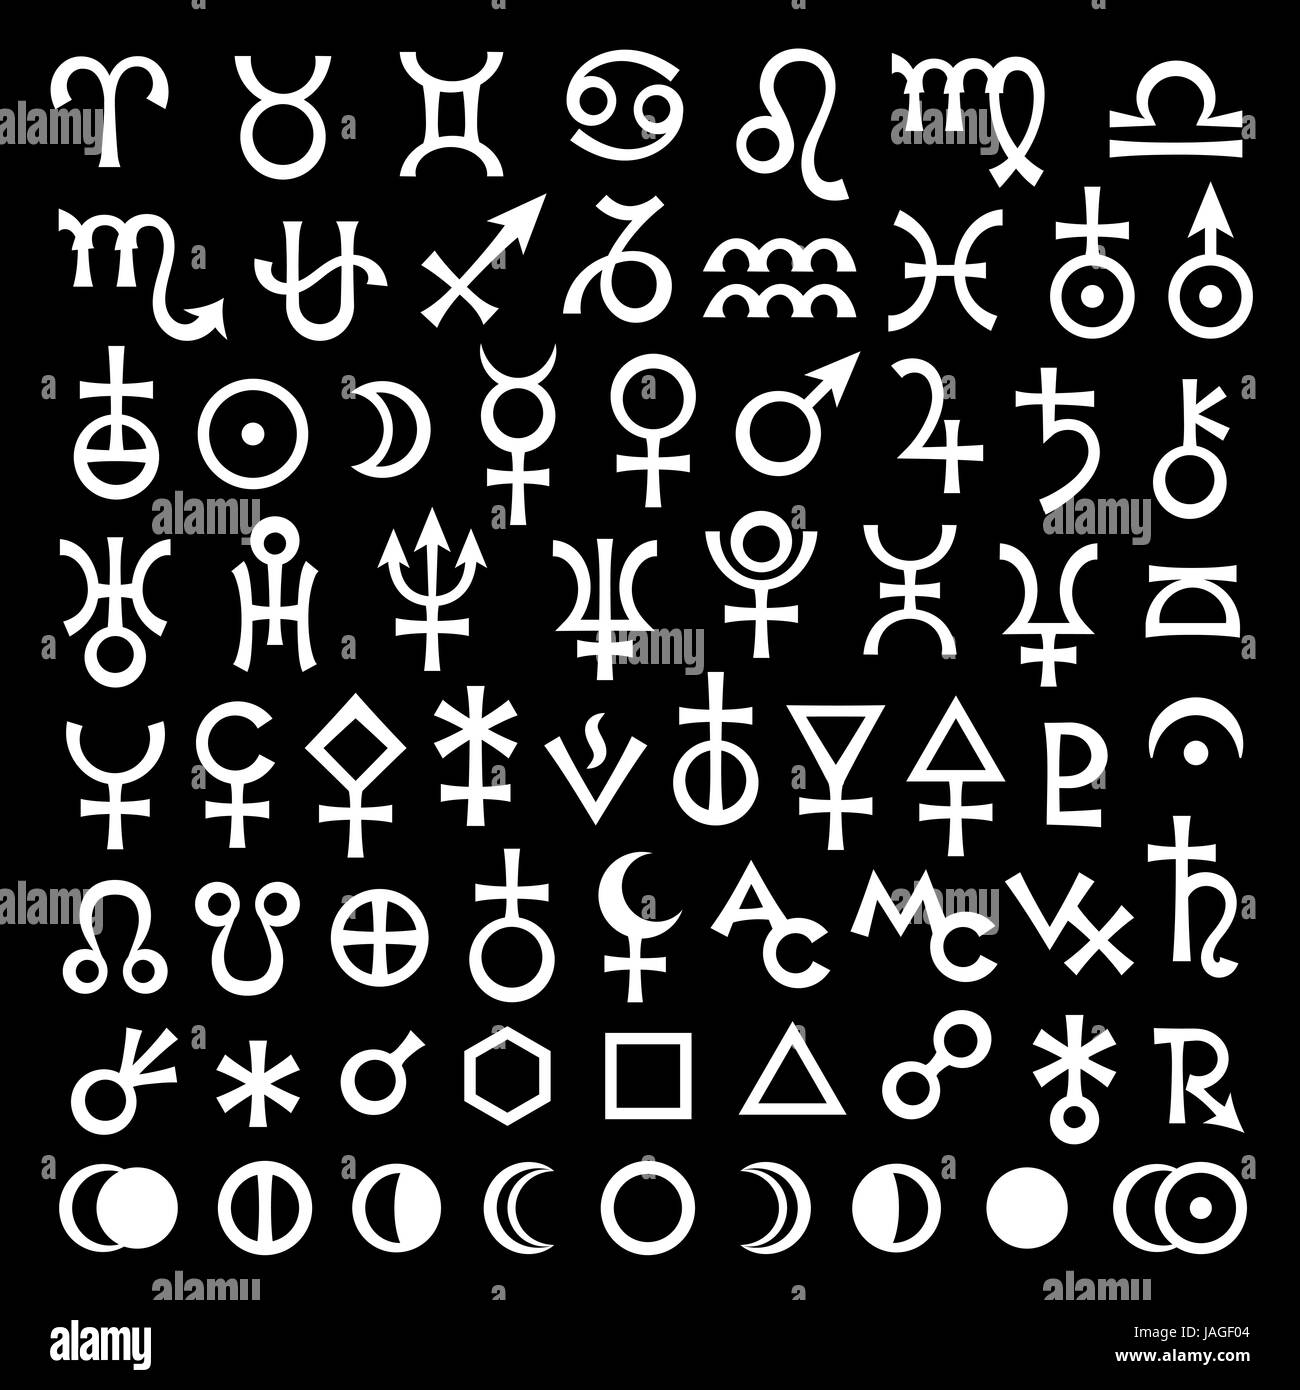 Astrological Signs of Zodiac, Planets, Asteroids, Aspects, Lunar phases, etc. (The big Black Set of Main Astrological Symbols). Stock Photo